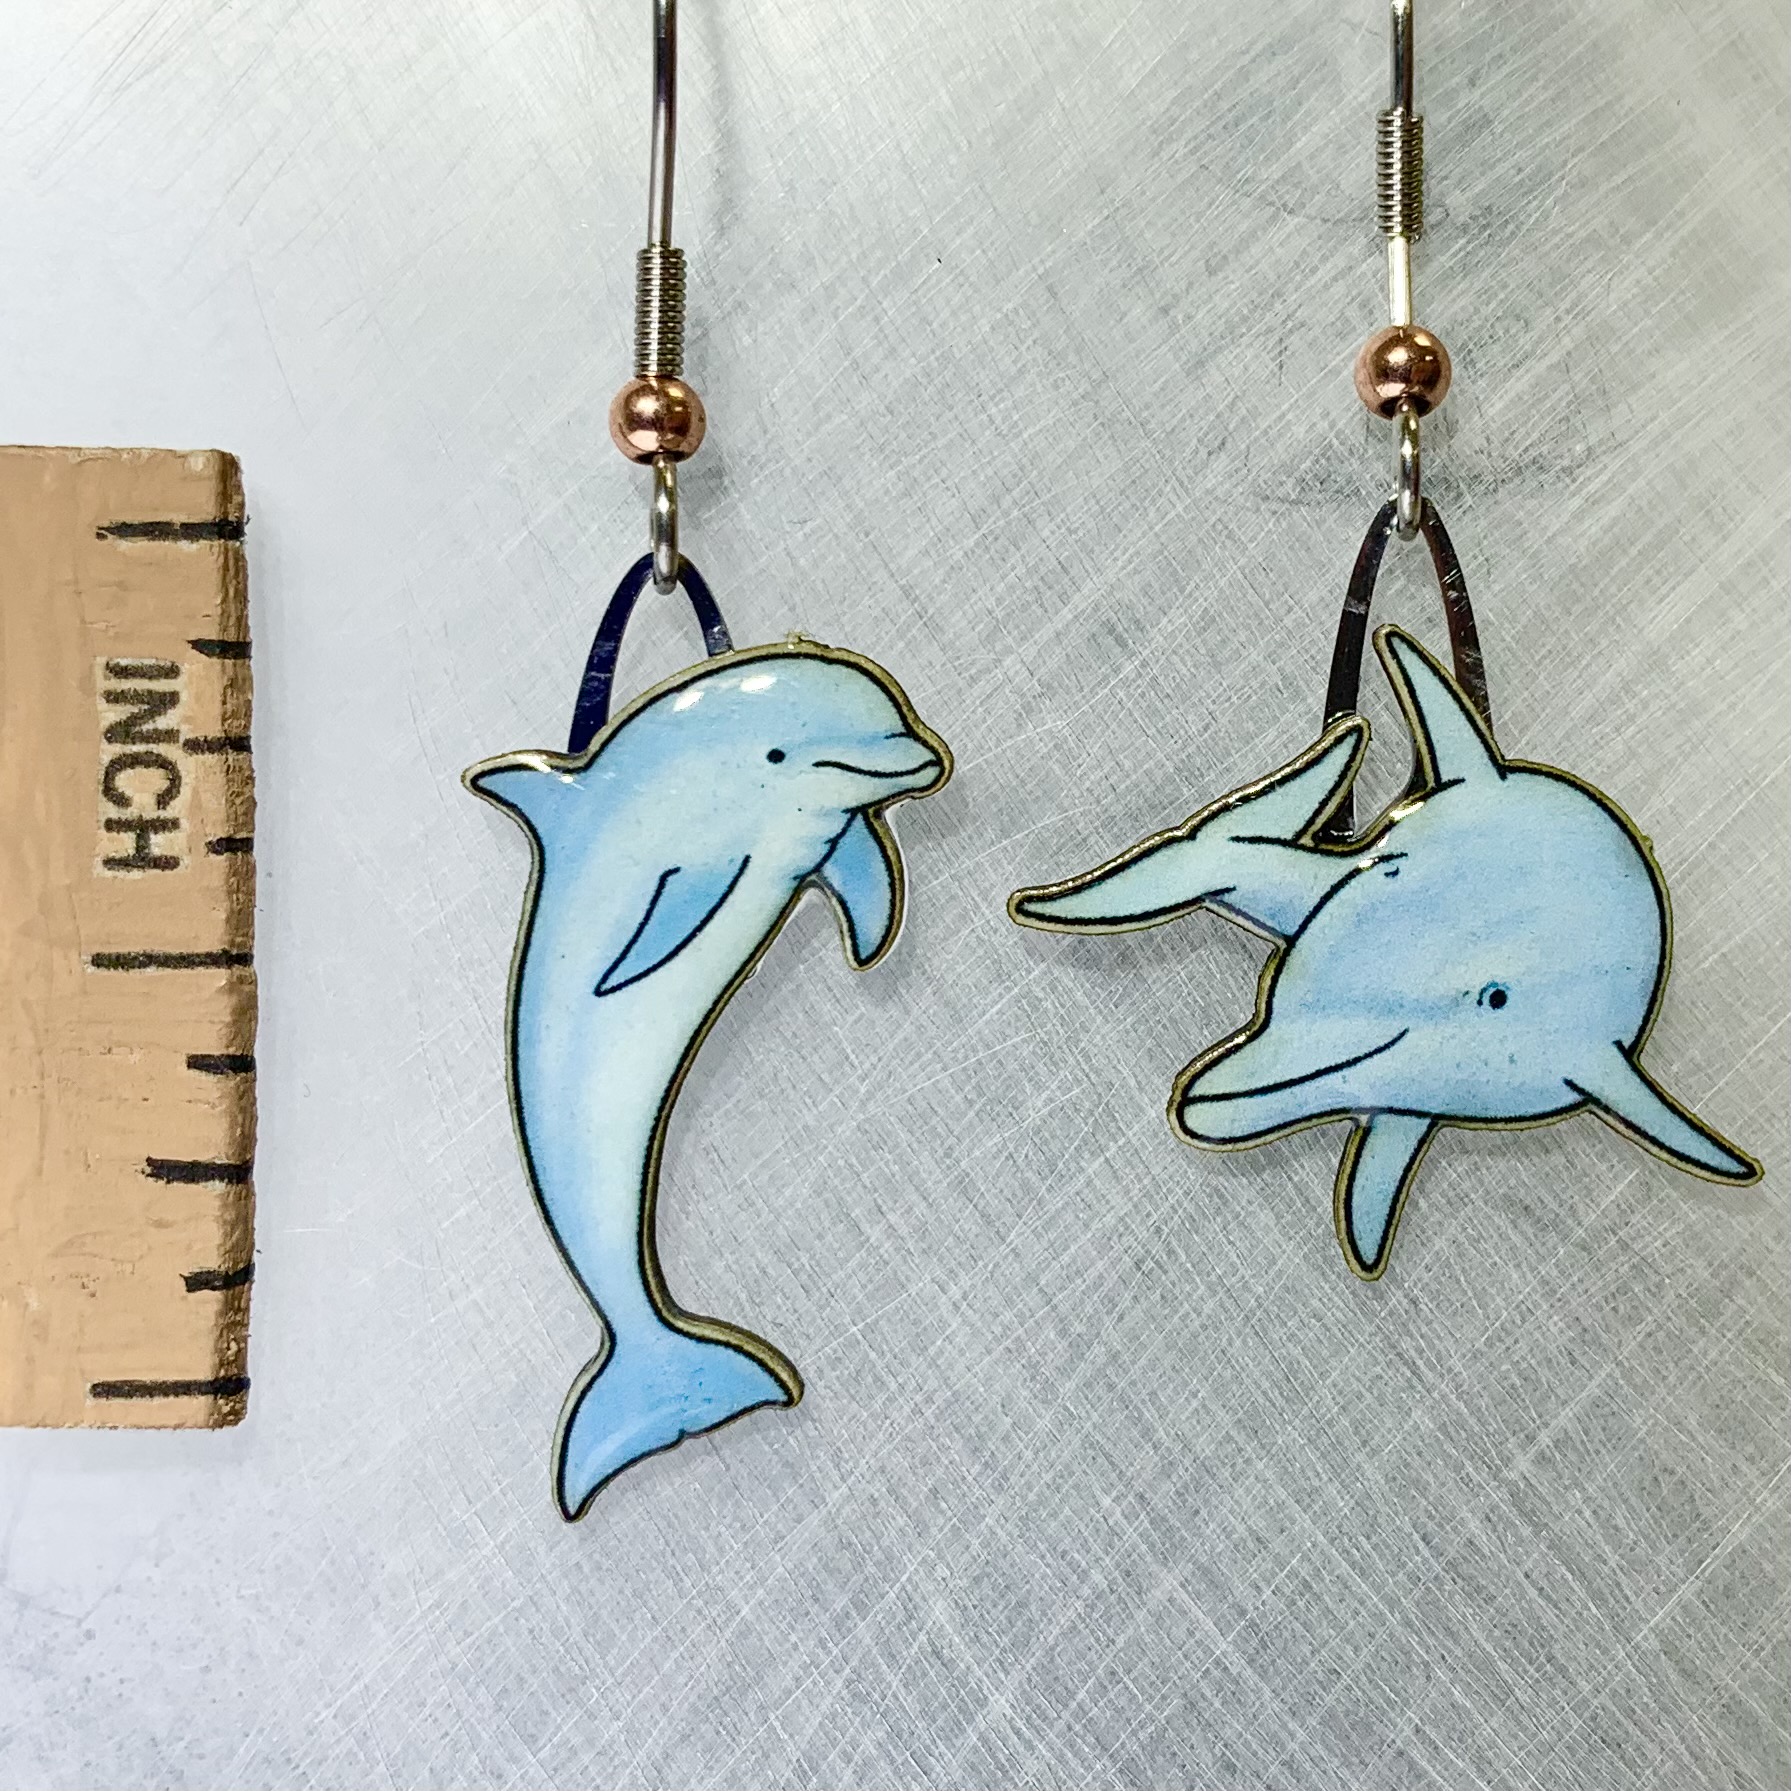 Picture shown is of 1 inch tall pair of earrings of the marine animal the Dolphin.